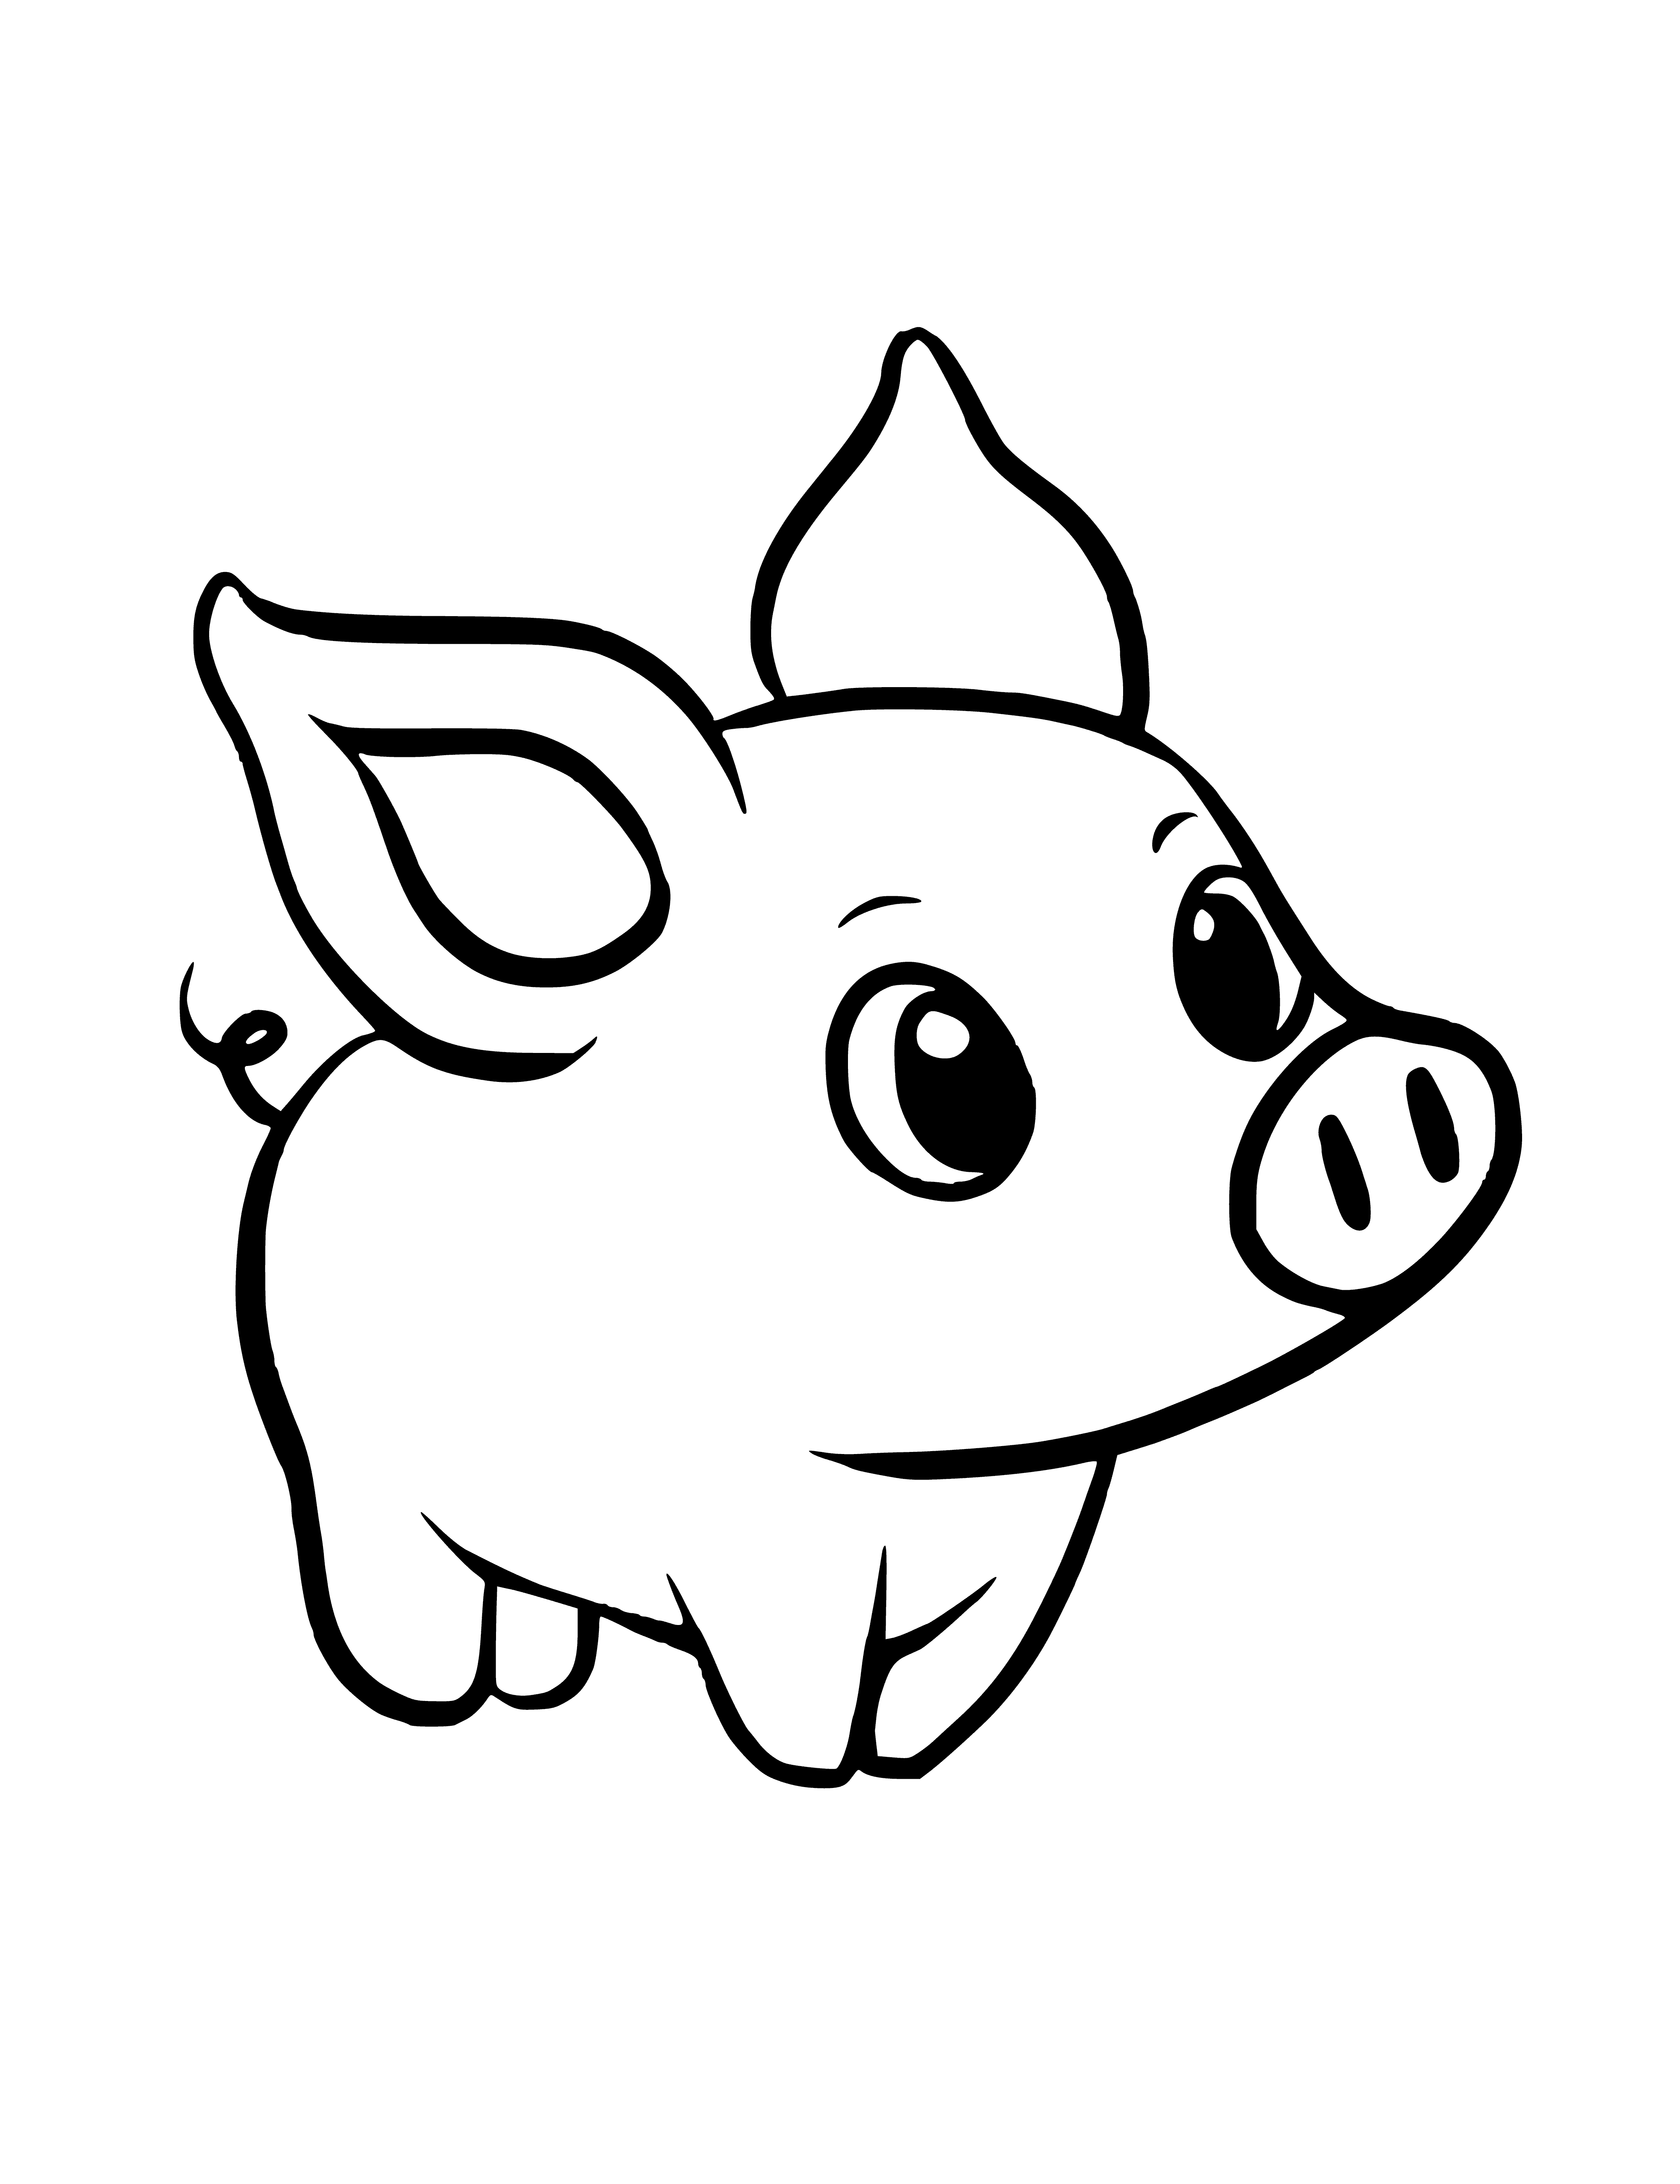 coloring page: A small, brown & pink pig stands in the center with five piglets, all w/ floppy ears & snouts, surrounding it.